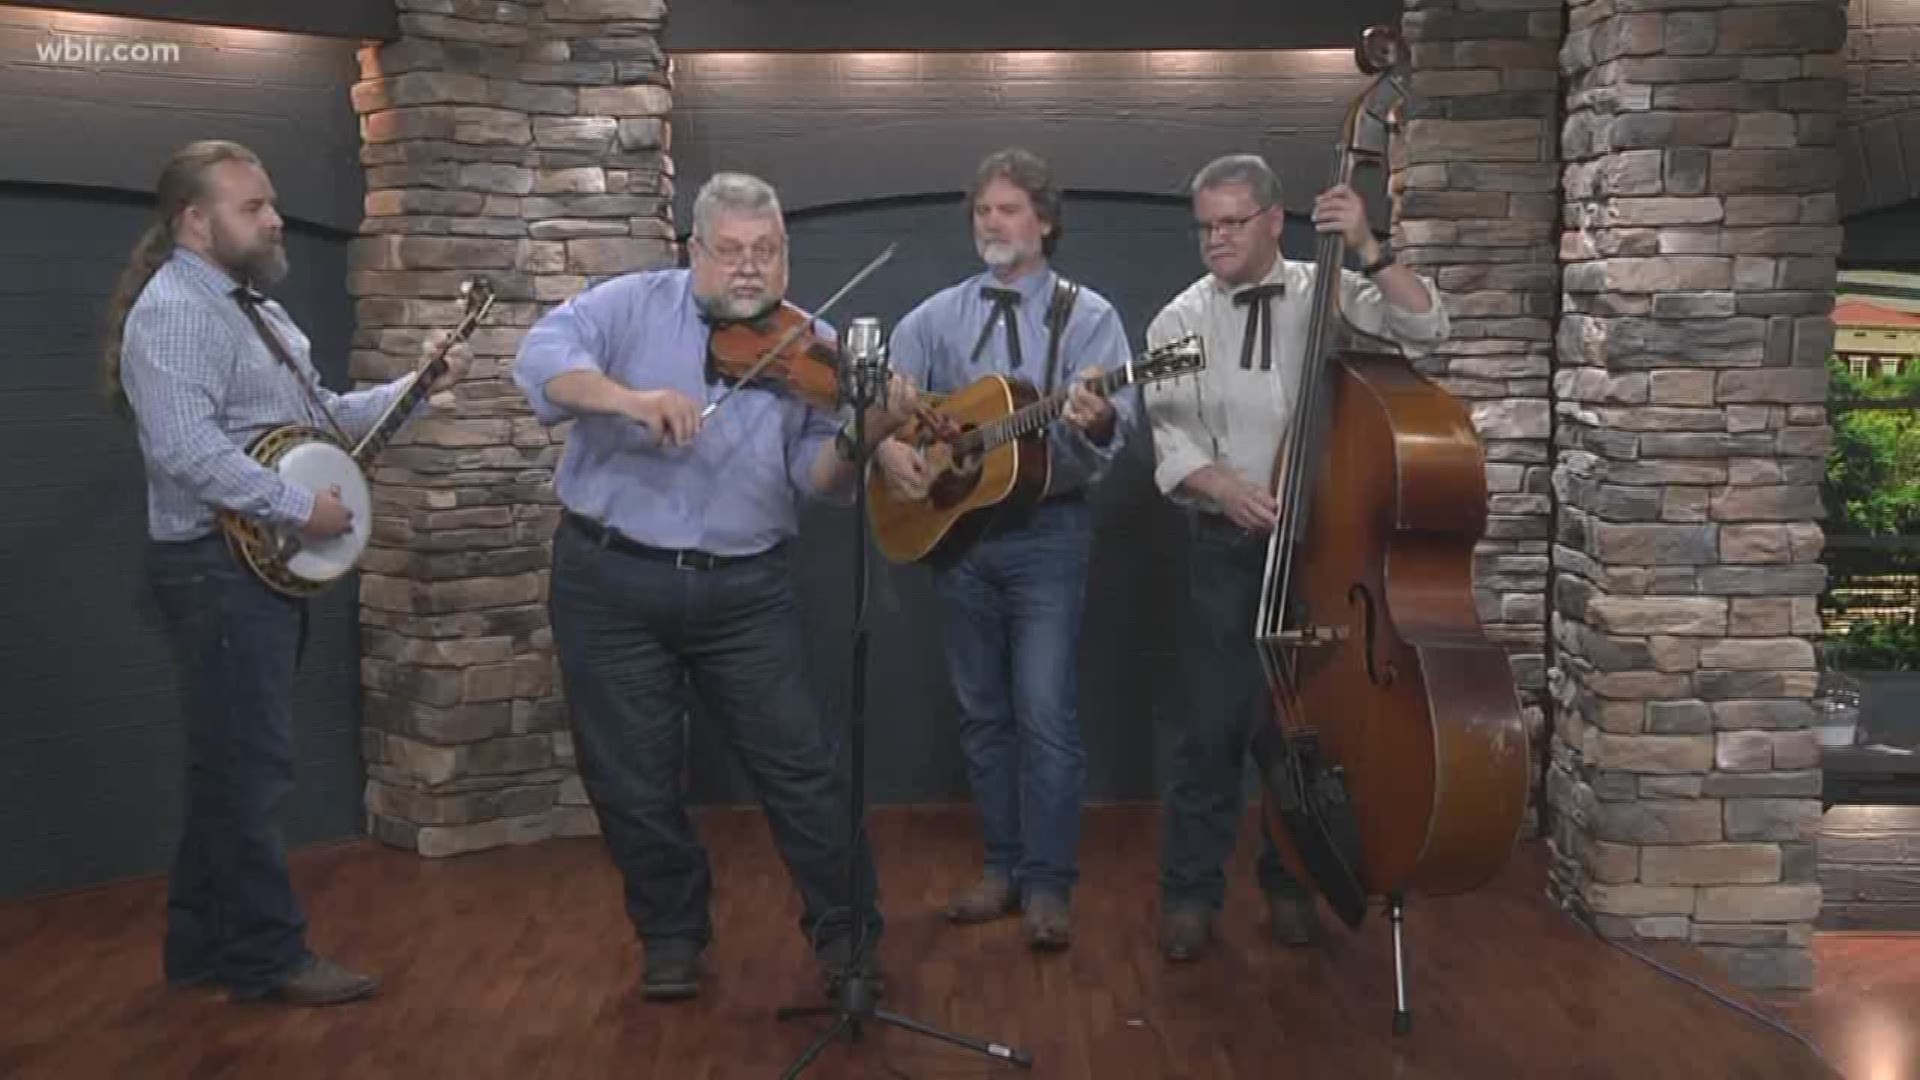 Members of Dollywood's Smoky Mountain String Band performs. Their Barbeque & Bluegrass event runs May 25-June 10. For a list of performers visit dollywood.comMay 22, 2018-4pm